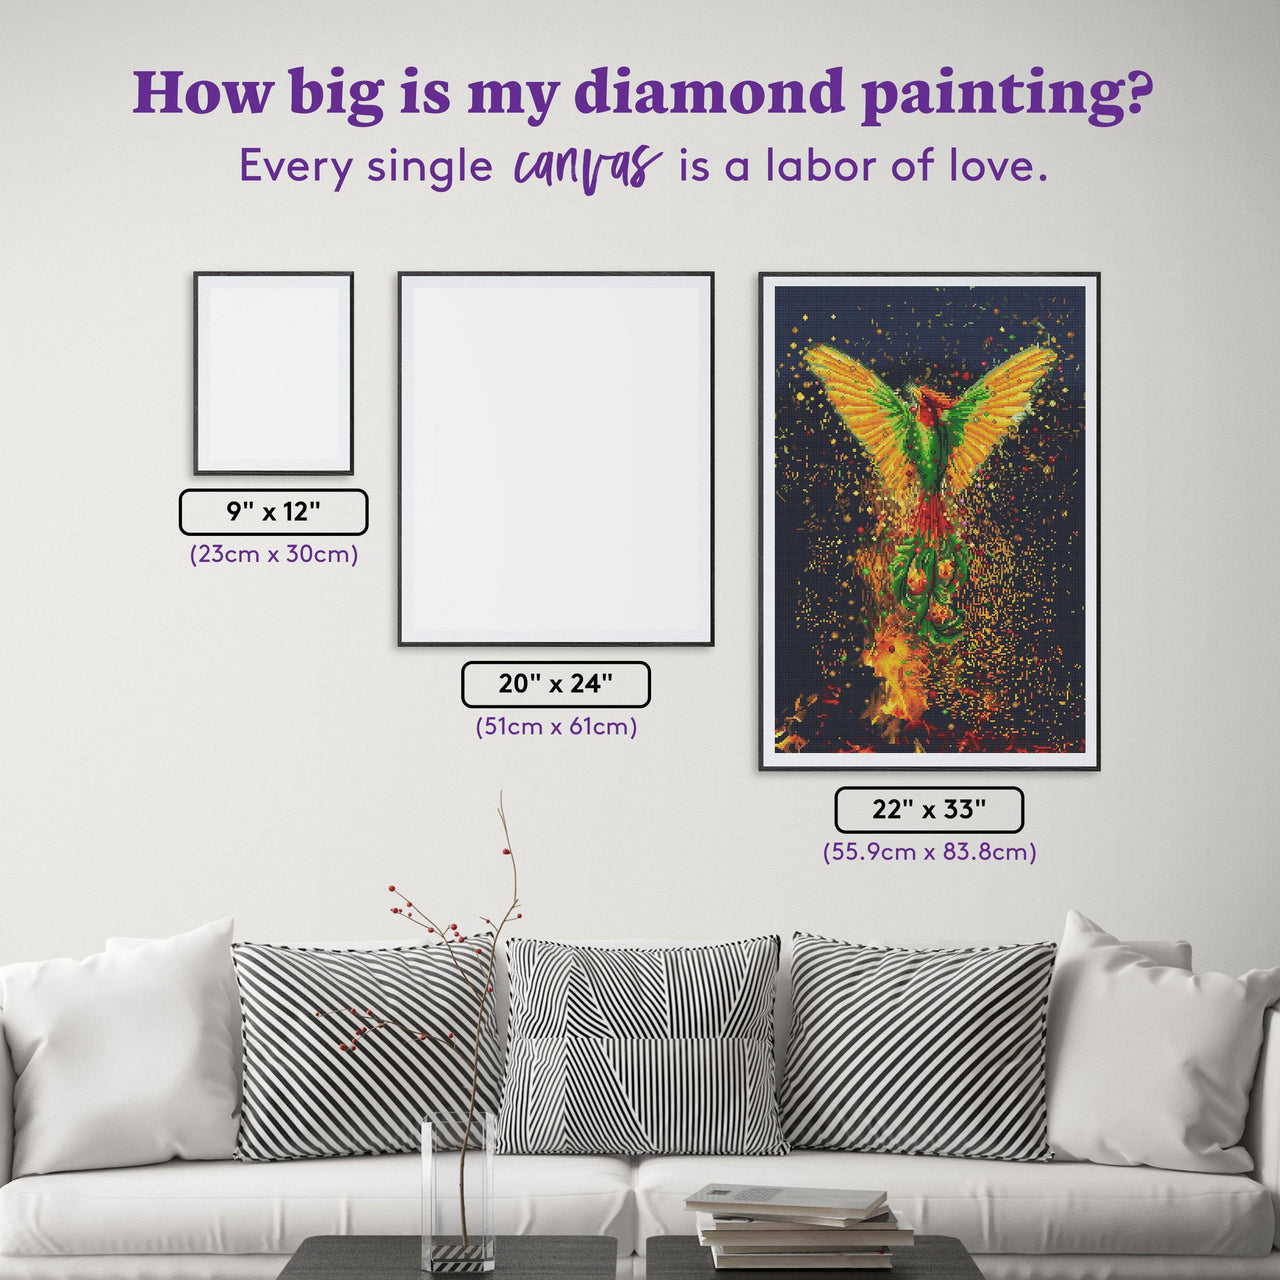 Diamond Painting Phoenix Rising 22" x 33" (55.9cm x 83.8cm) / Round with 42 Colors including 4 ABs / 59,501